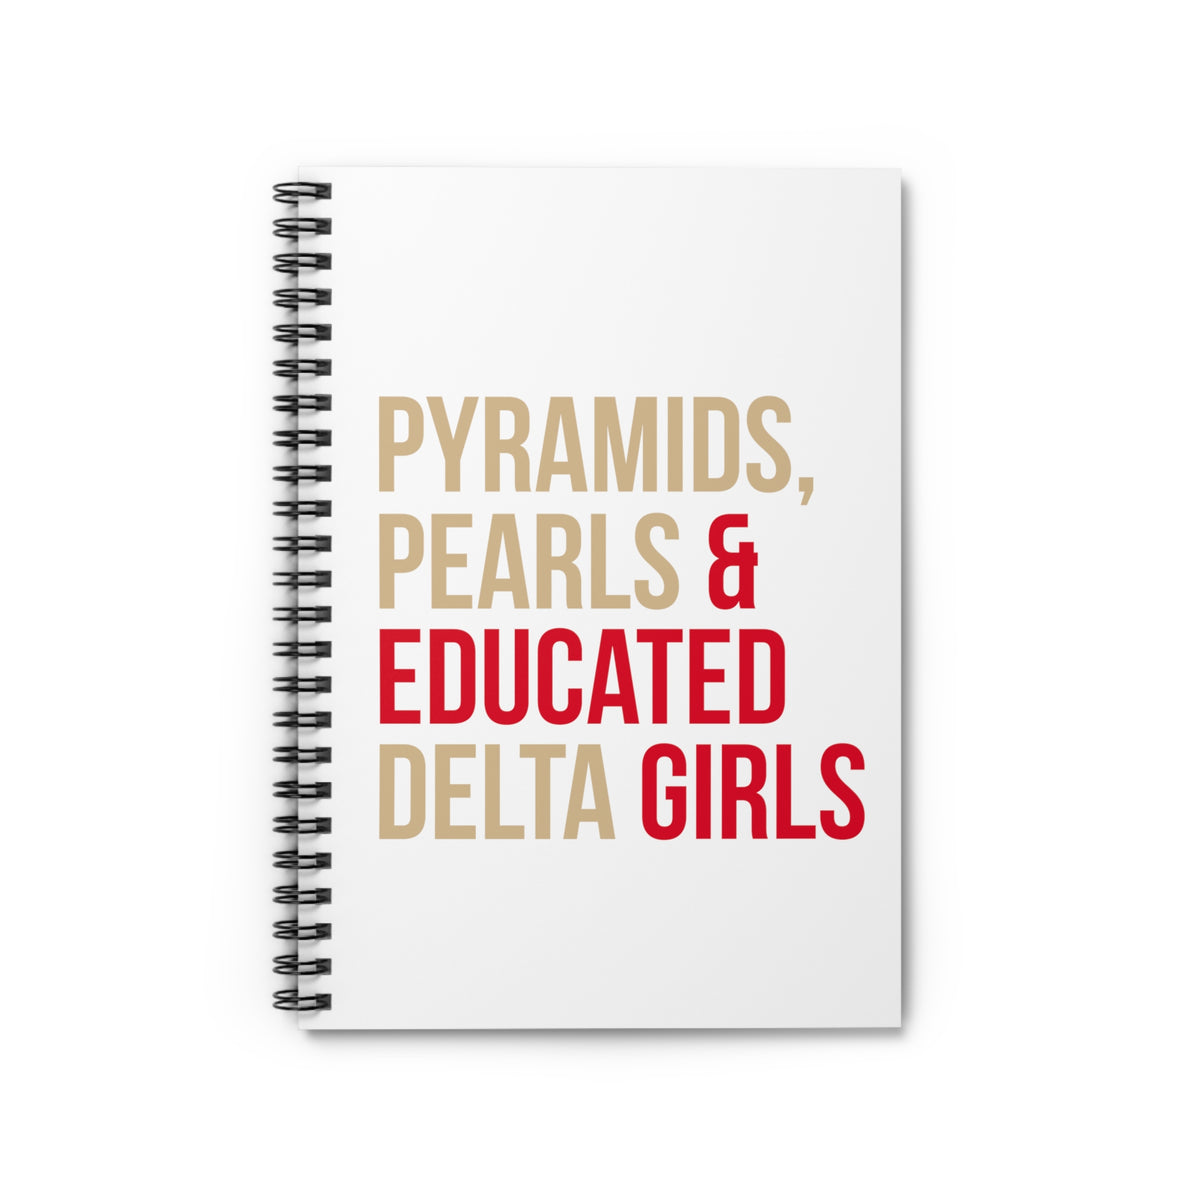 Pyramids Pearls & Educated Delta Girls Spiral Notebook - Multi